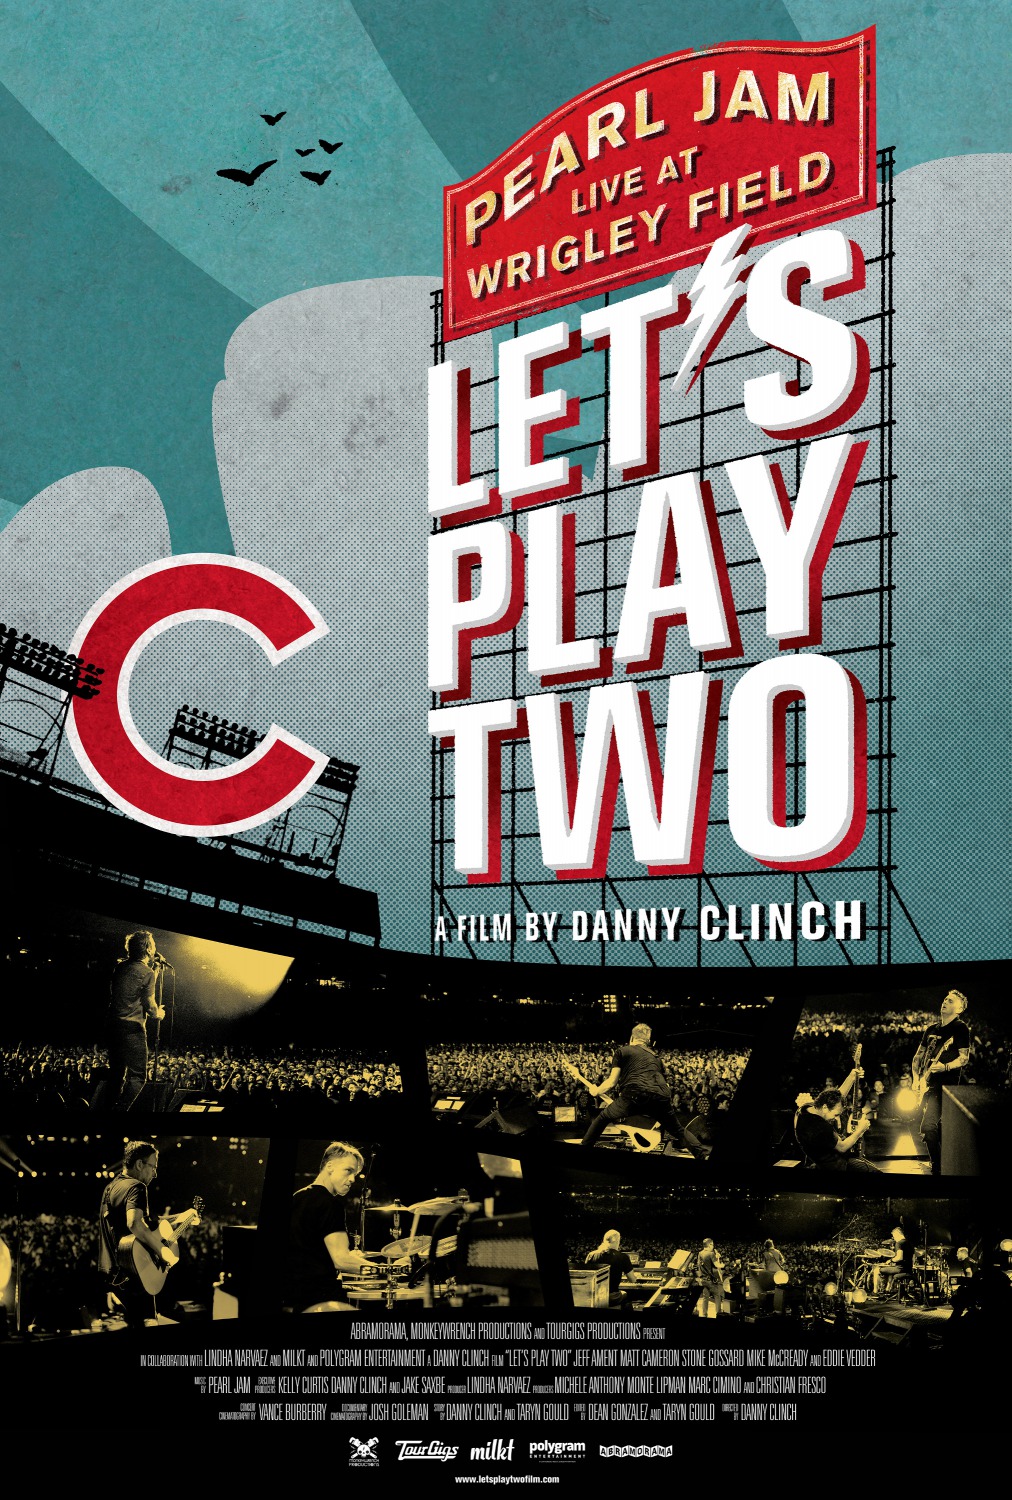 Extra Large Movie Poster Image for Pearl Jam: Let's Play Two 